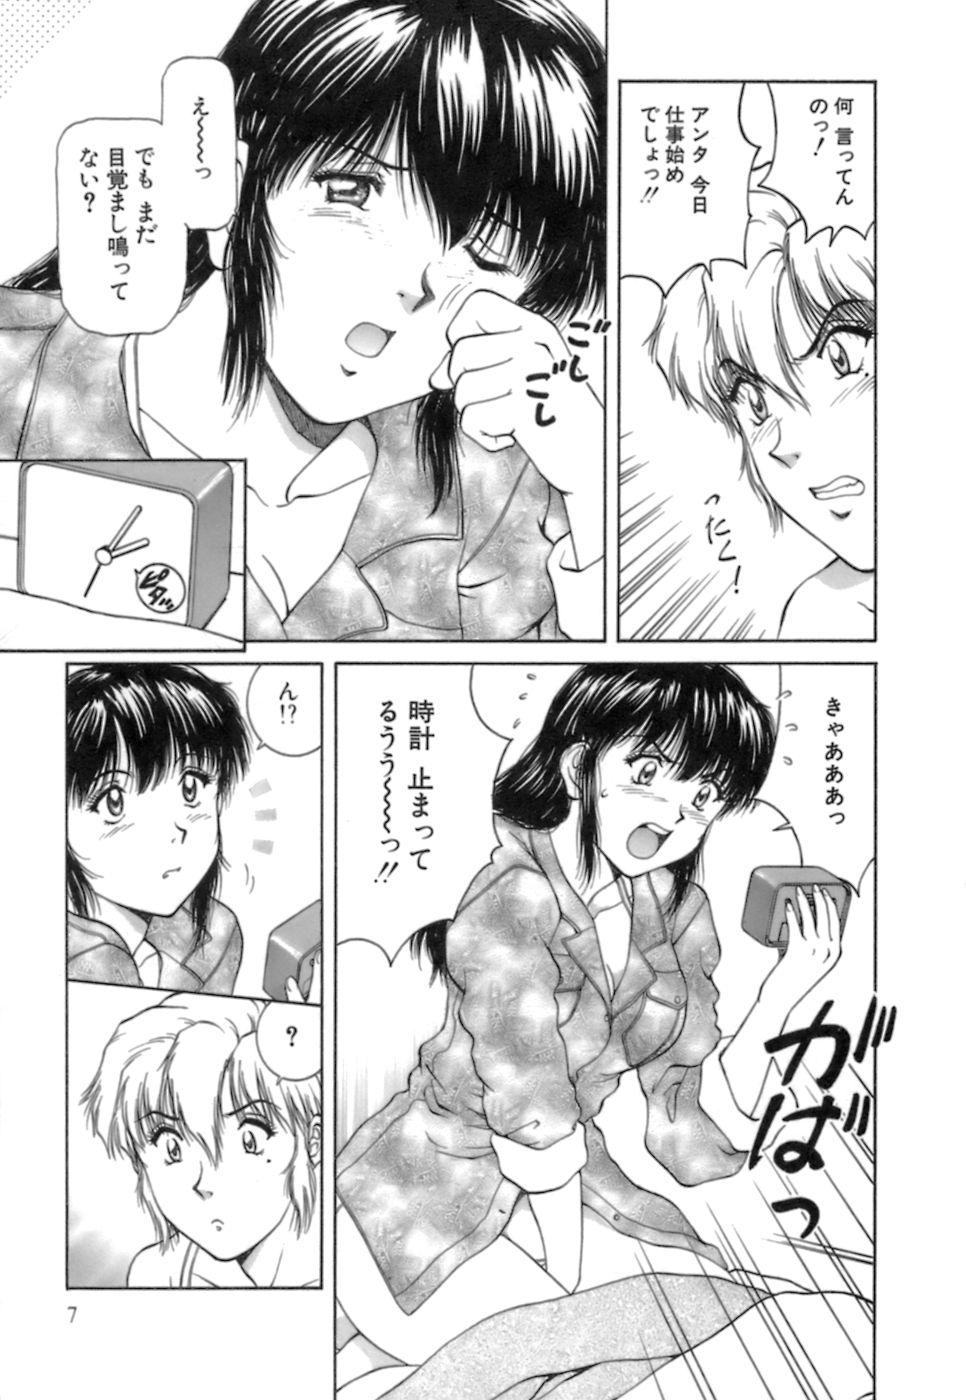 Load [Tenyou] Back All-right Mina-chan! 2 Khmer - Page 8